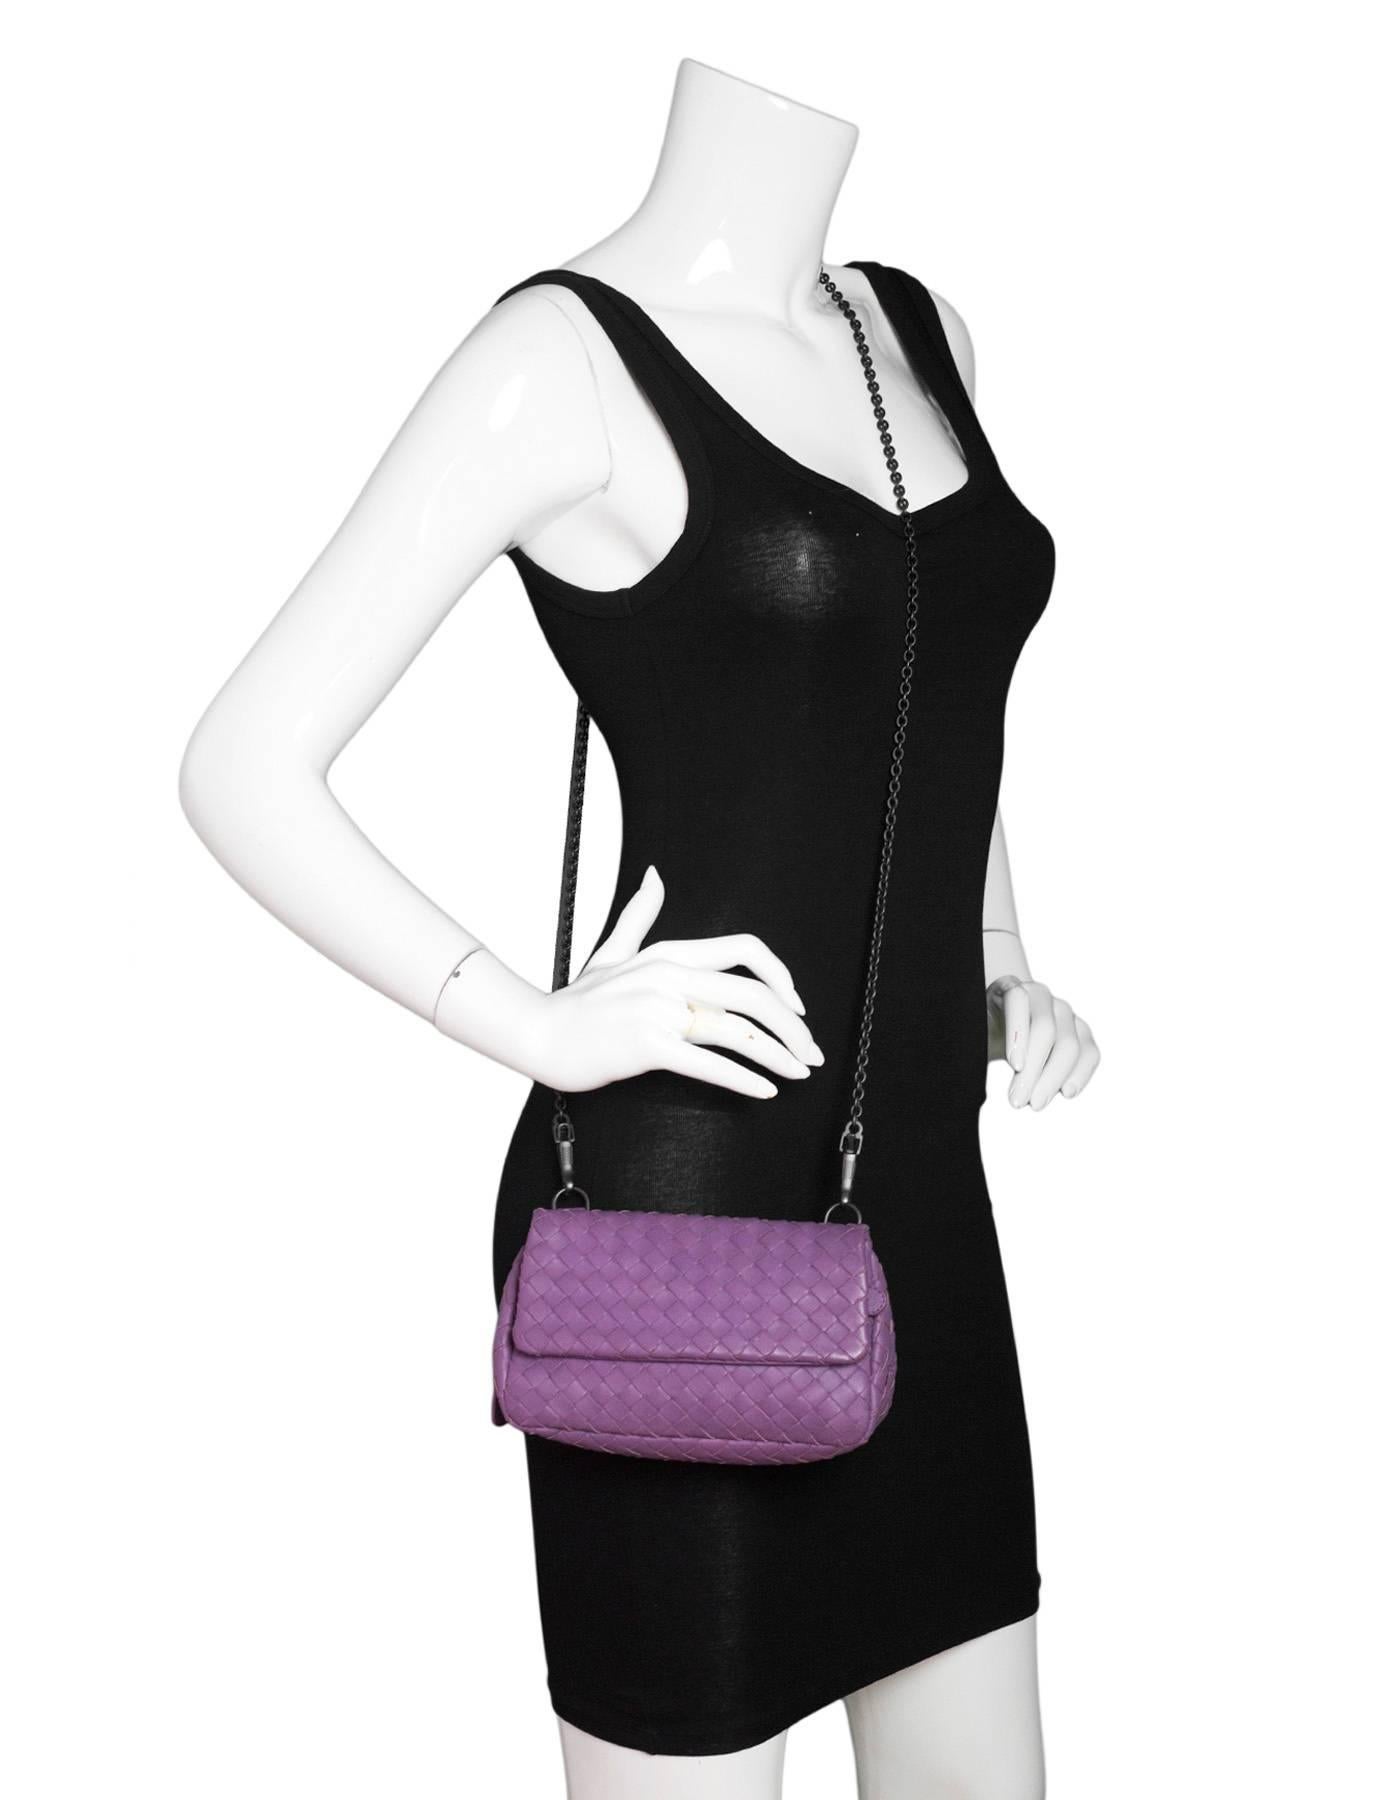 Bottega Veneta Purple Nappa Intrecciato Small Chain Crossbody

Made In: Italy
Color: Purple
Hardware: Dark grey
Materials: Leather, metal
Lining: Taupe suede
Closure/Opening: Flap top with side snaps
Exterior Pockets: Zip pocket under flap, zip